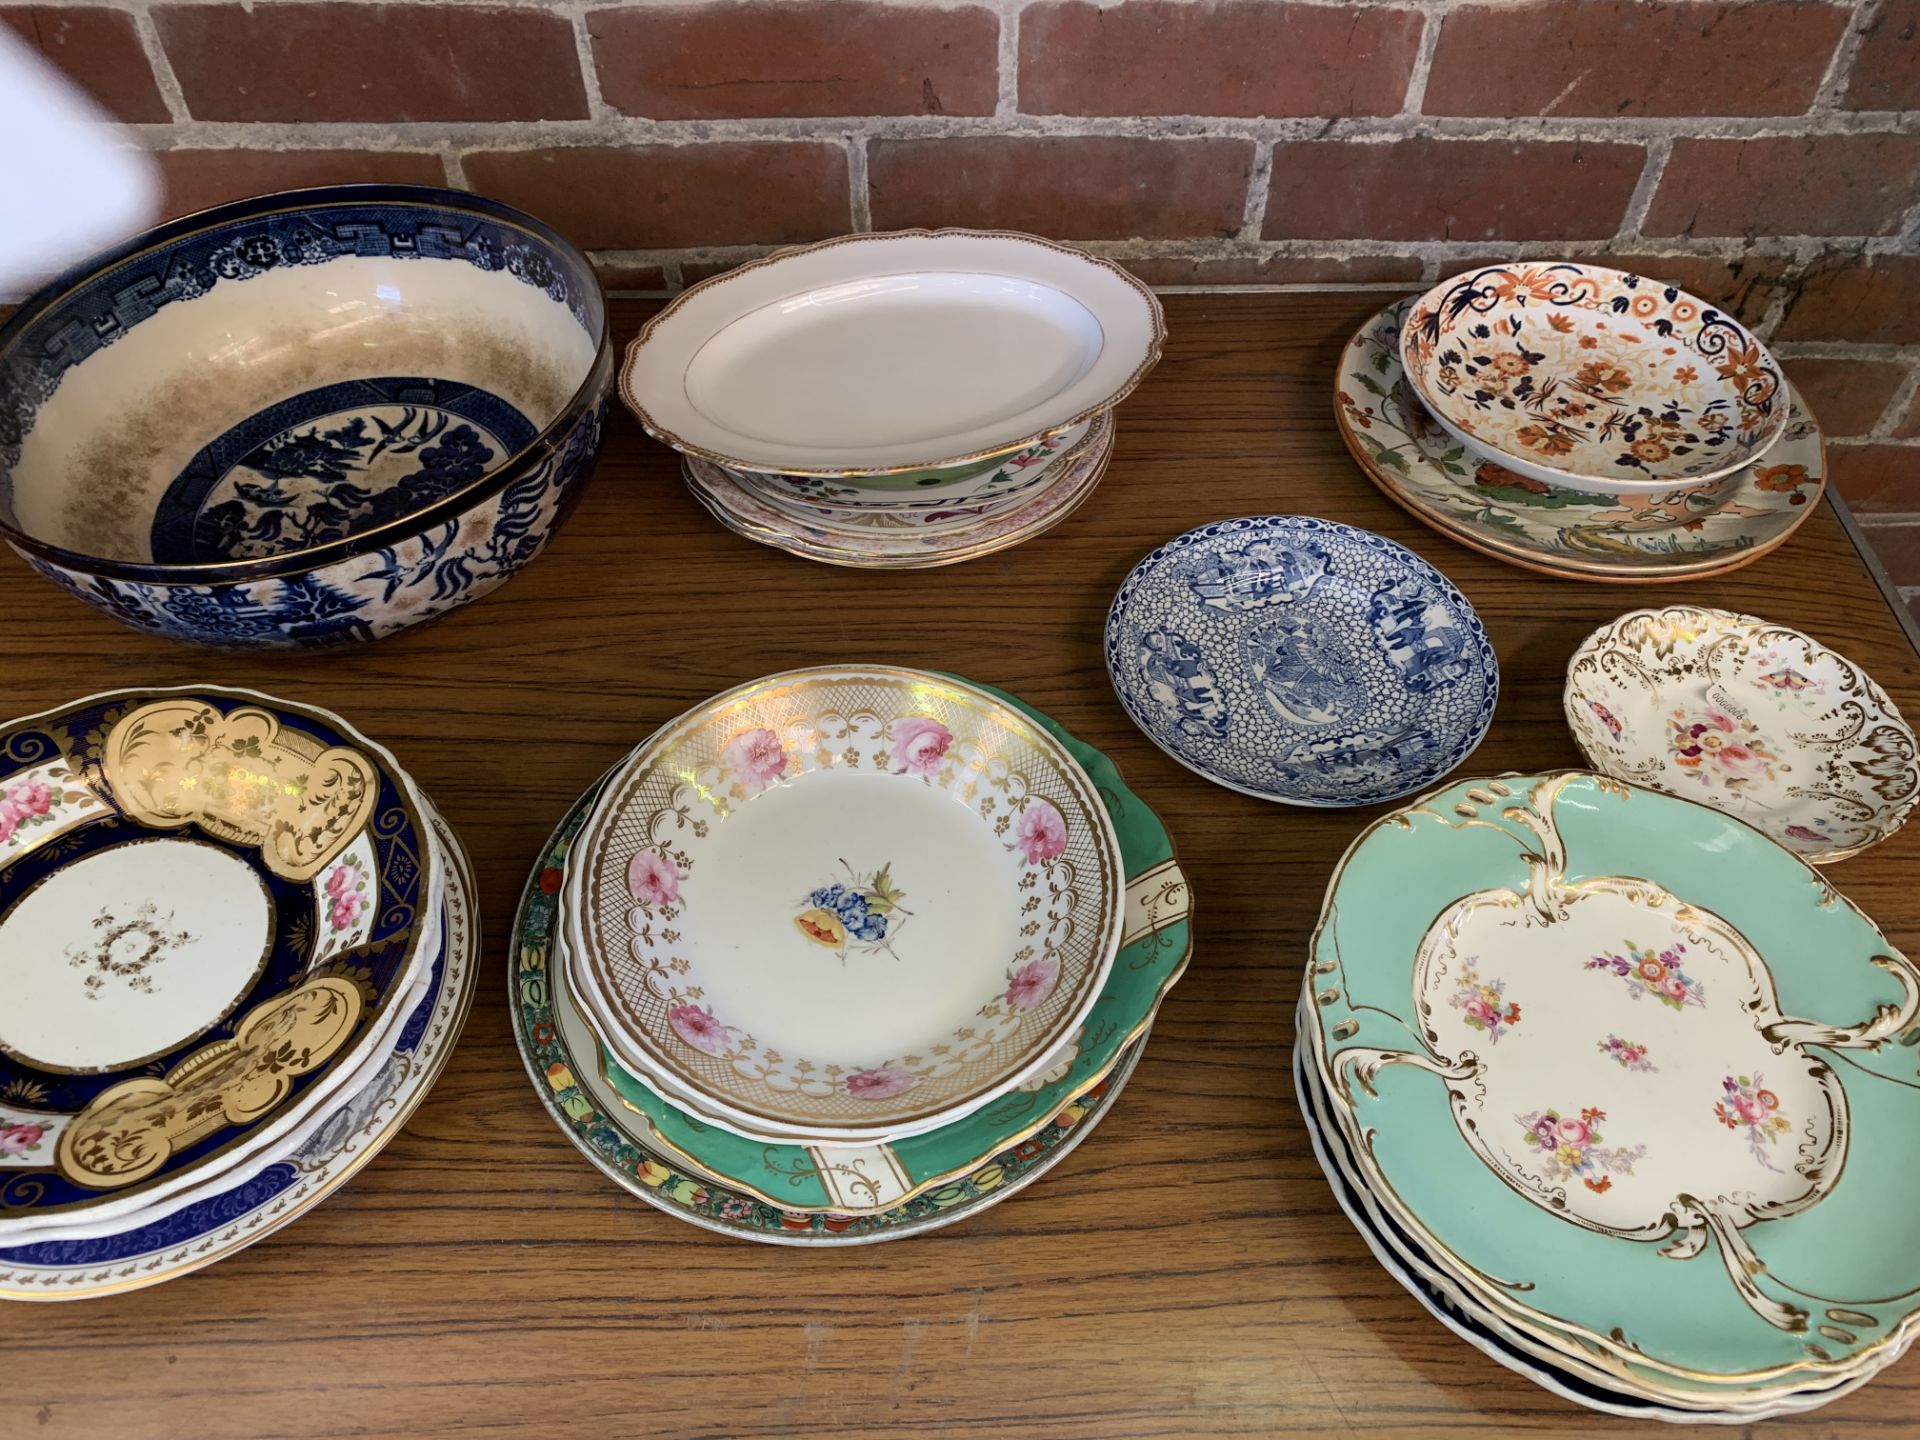 Quantity of decorative china plates, to include Wedgewood, Mason's and Minton